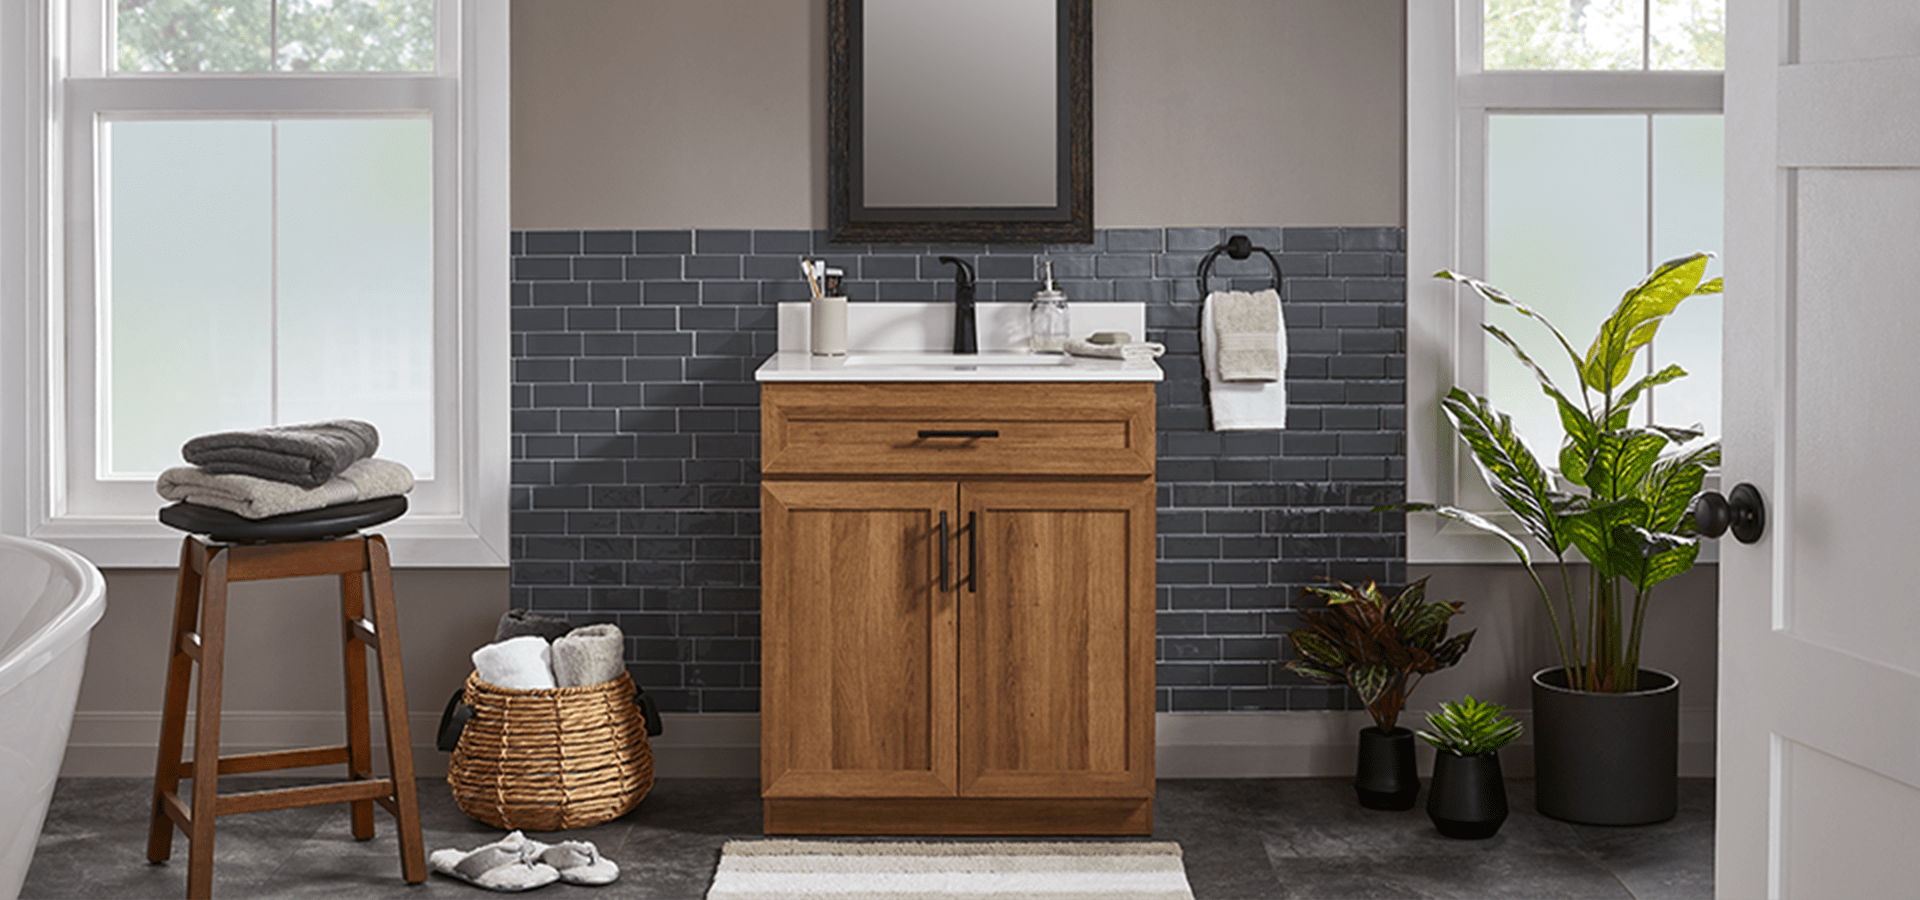 Bathroom with natural wood-finish vanity, dark wood stool, canvas cape basket, mirror with black frame.